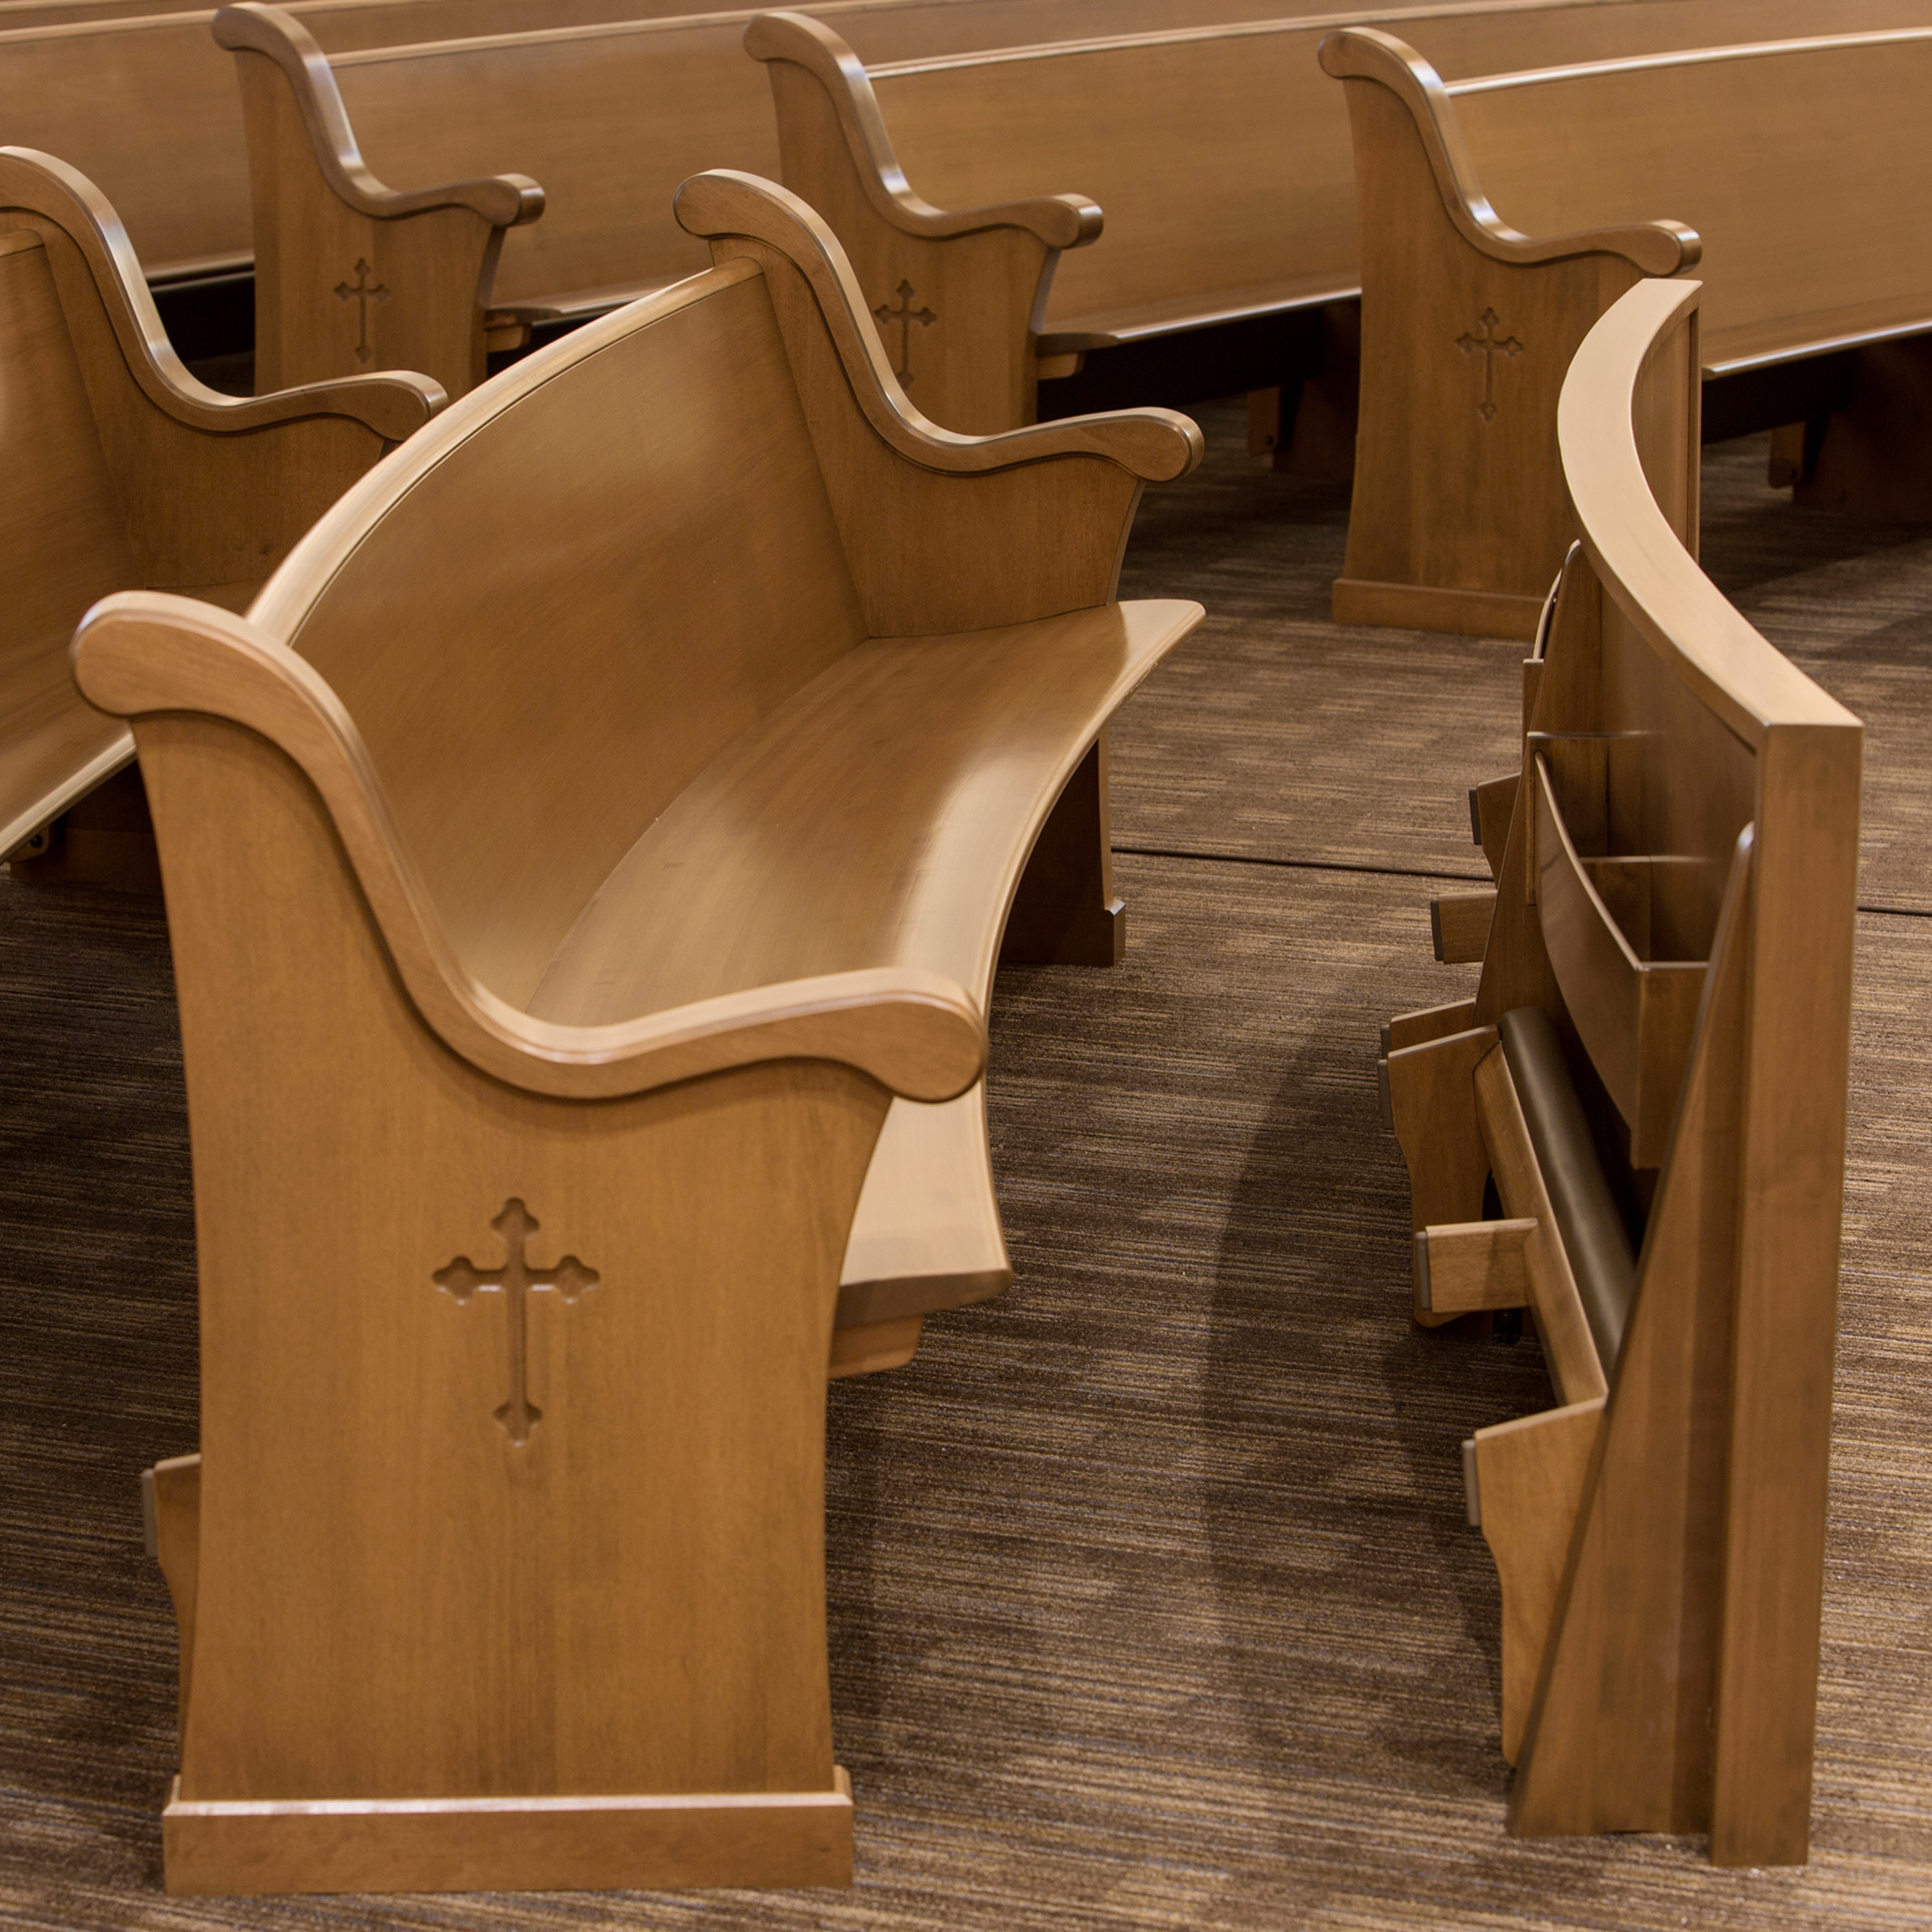 St. Demetrios Greek Orthodox Church Radial Pews and Radial Frontal with Kneeler and Book Cases